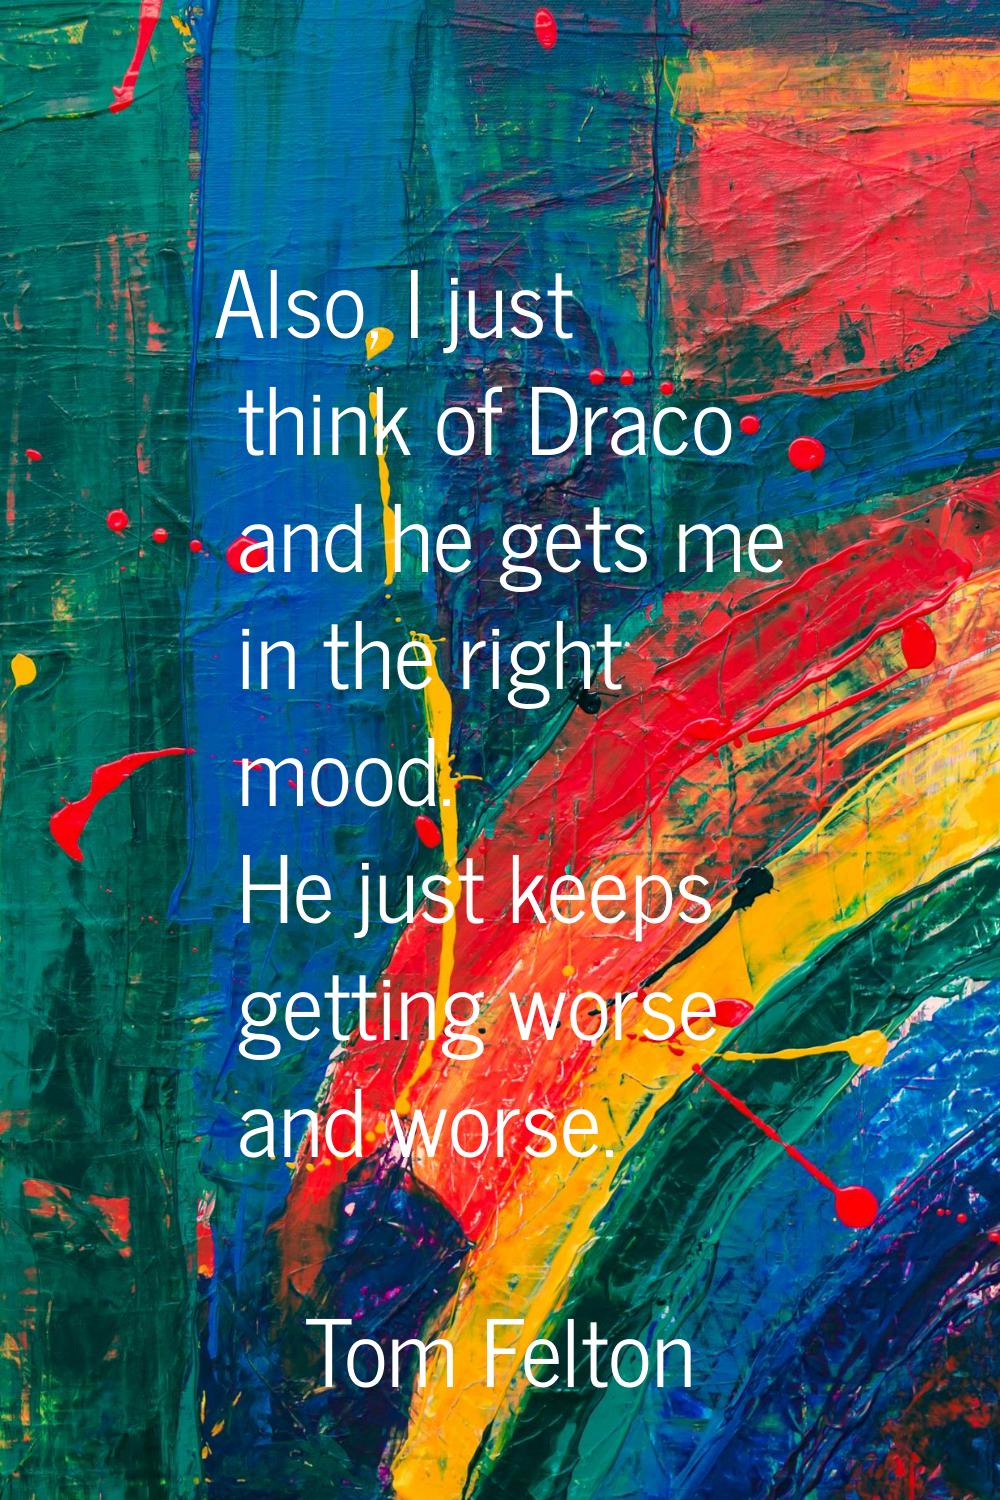 Also, I just think of Draco and he gets me in the right mood. He just keeps getting worse and worse